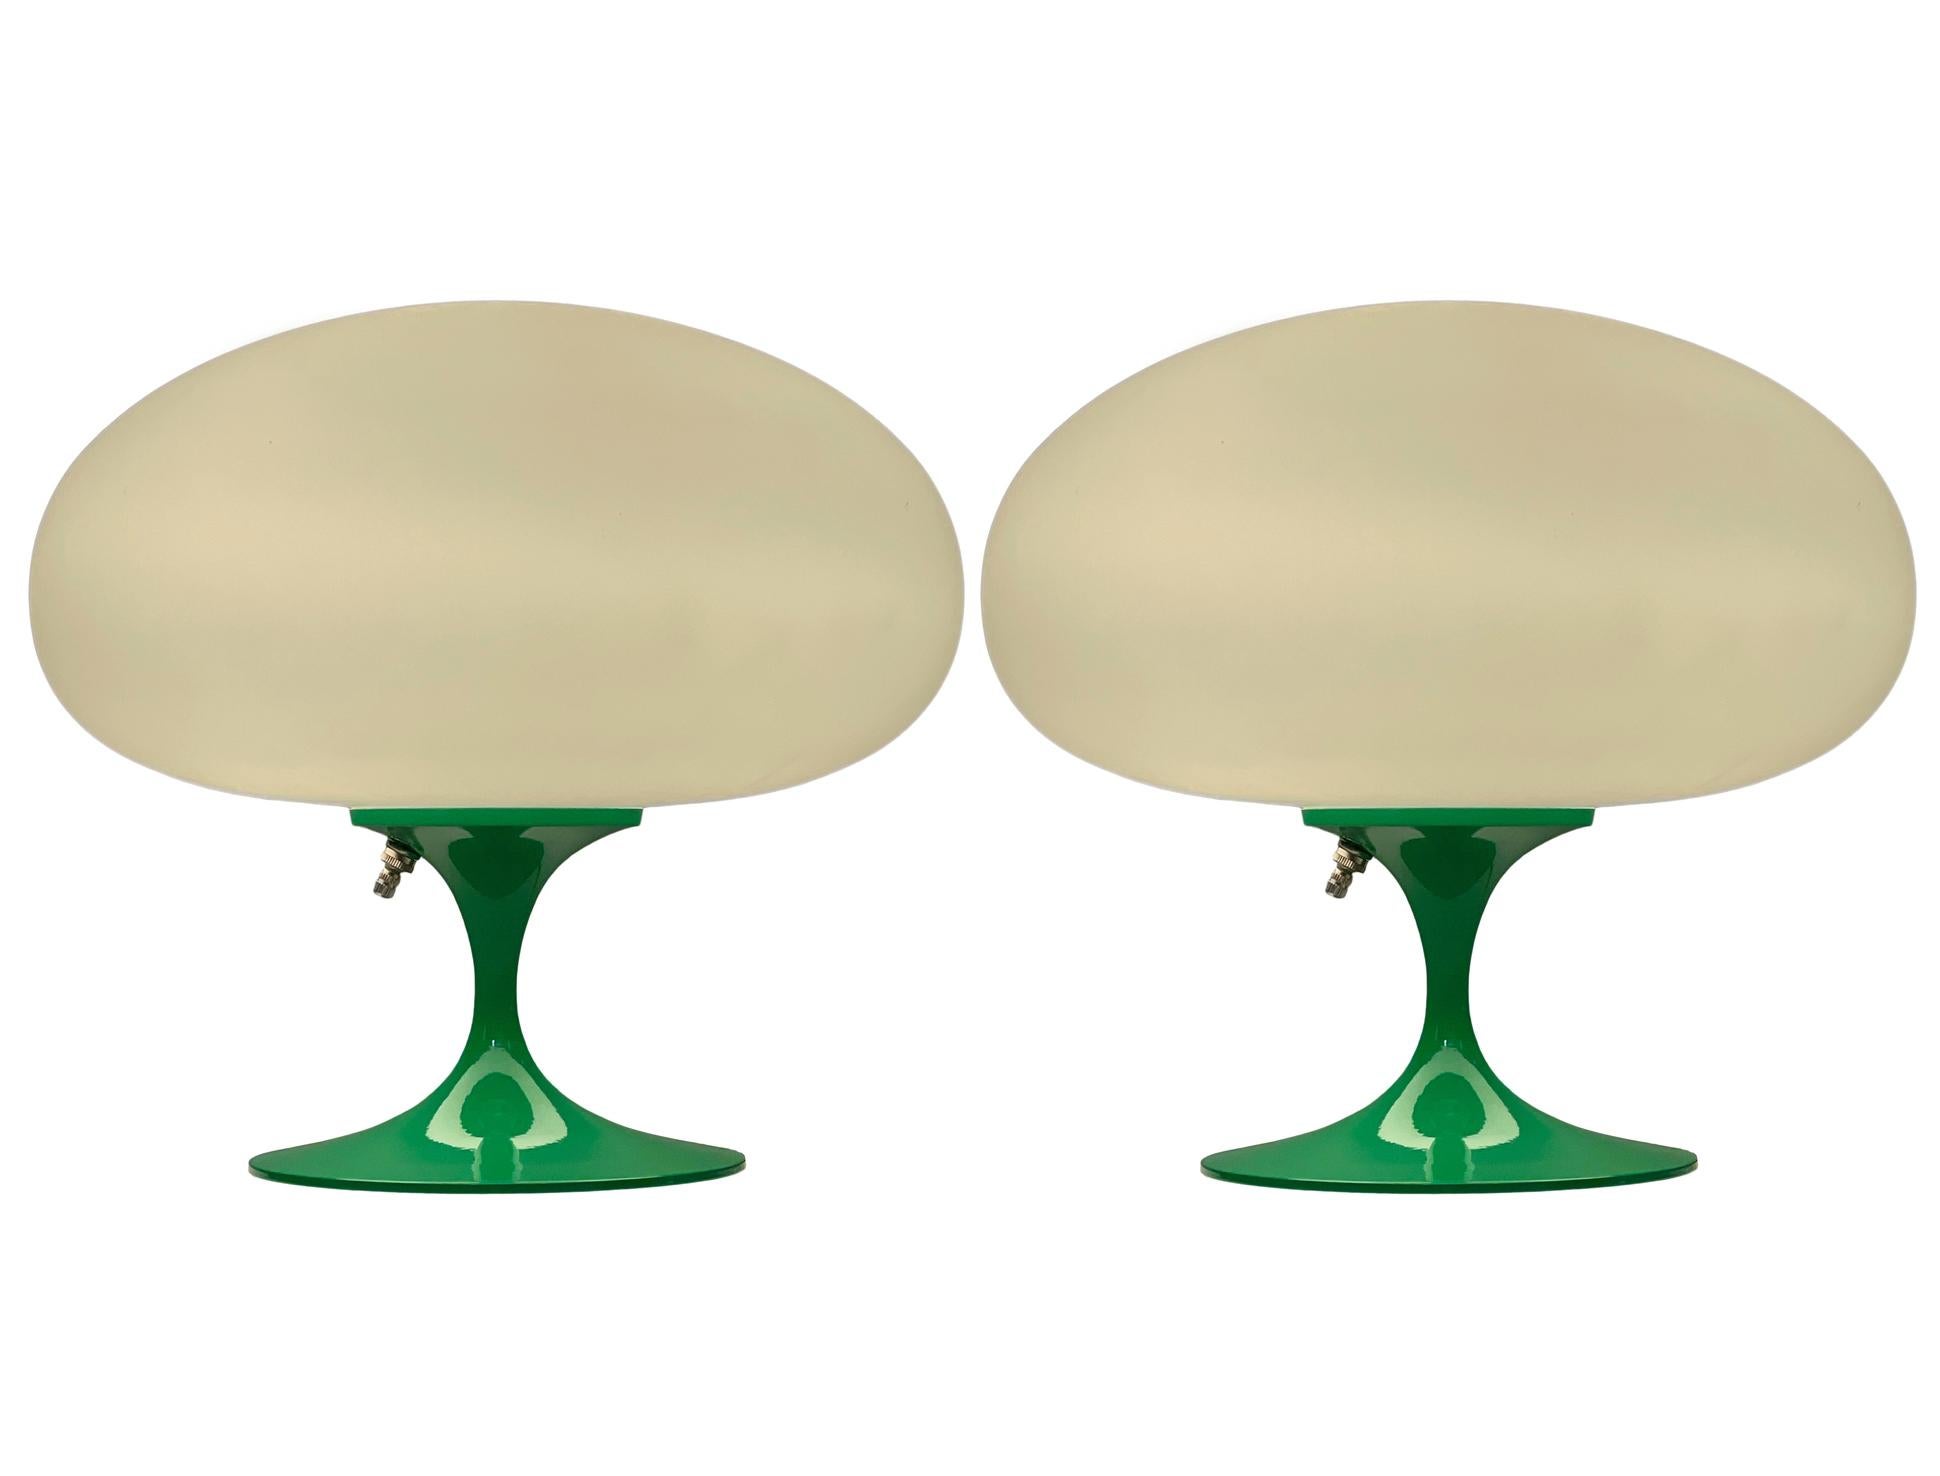 A gorgeous matching pair of tulip form table lamps after Laurel Lamp Company These feature green powder coated cast aluminum bases with mouth blown frosted white glass shades. The price includes the pair as shown.